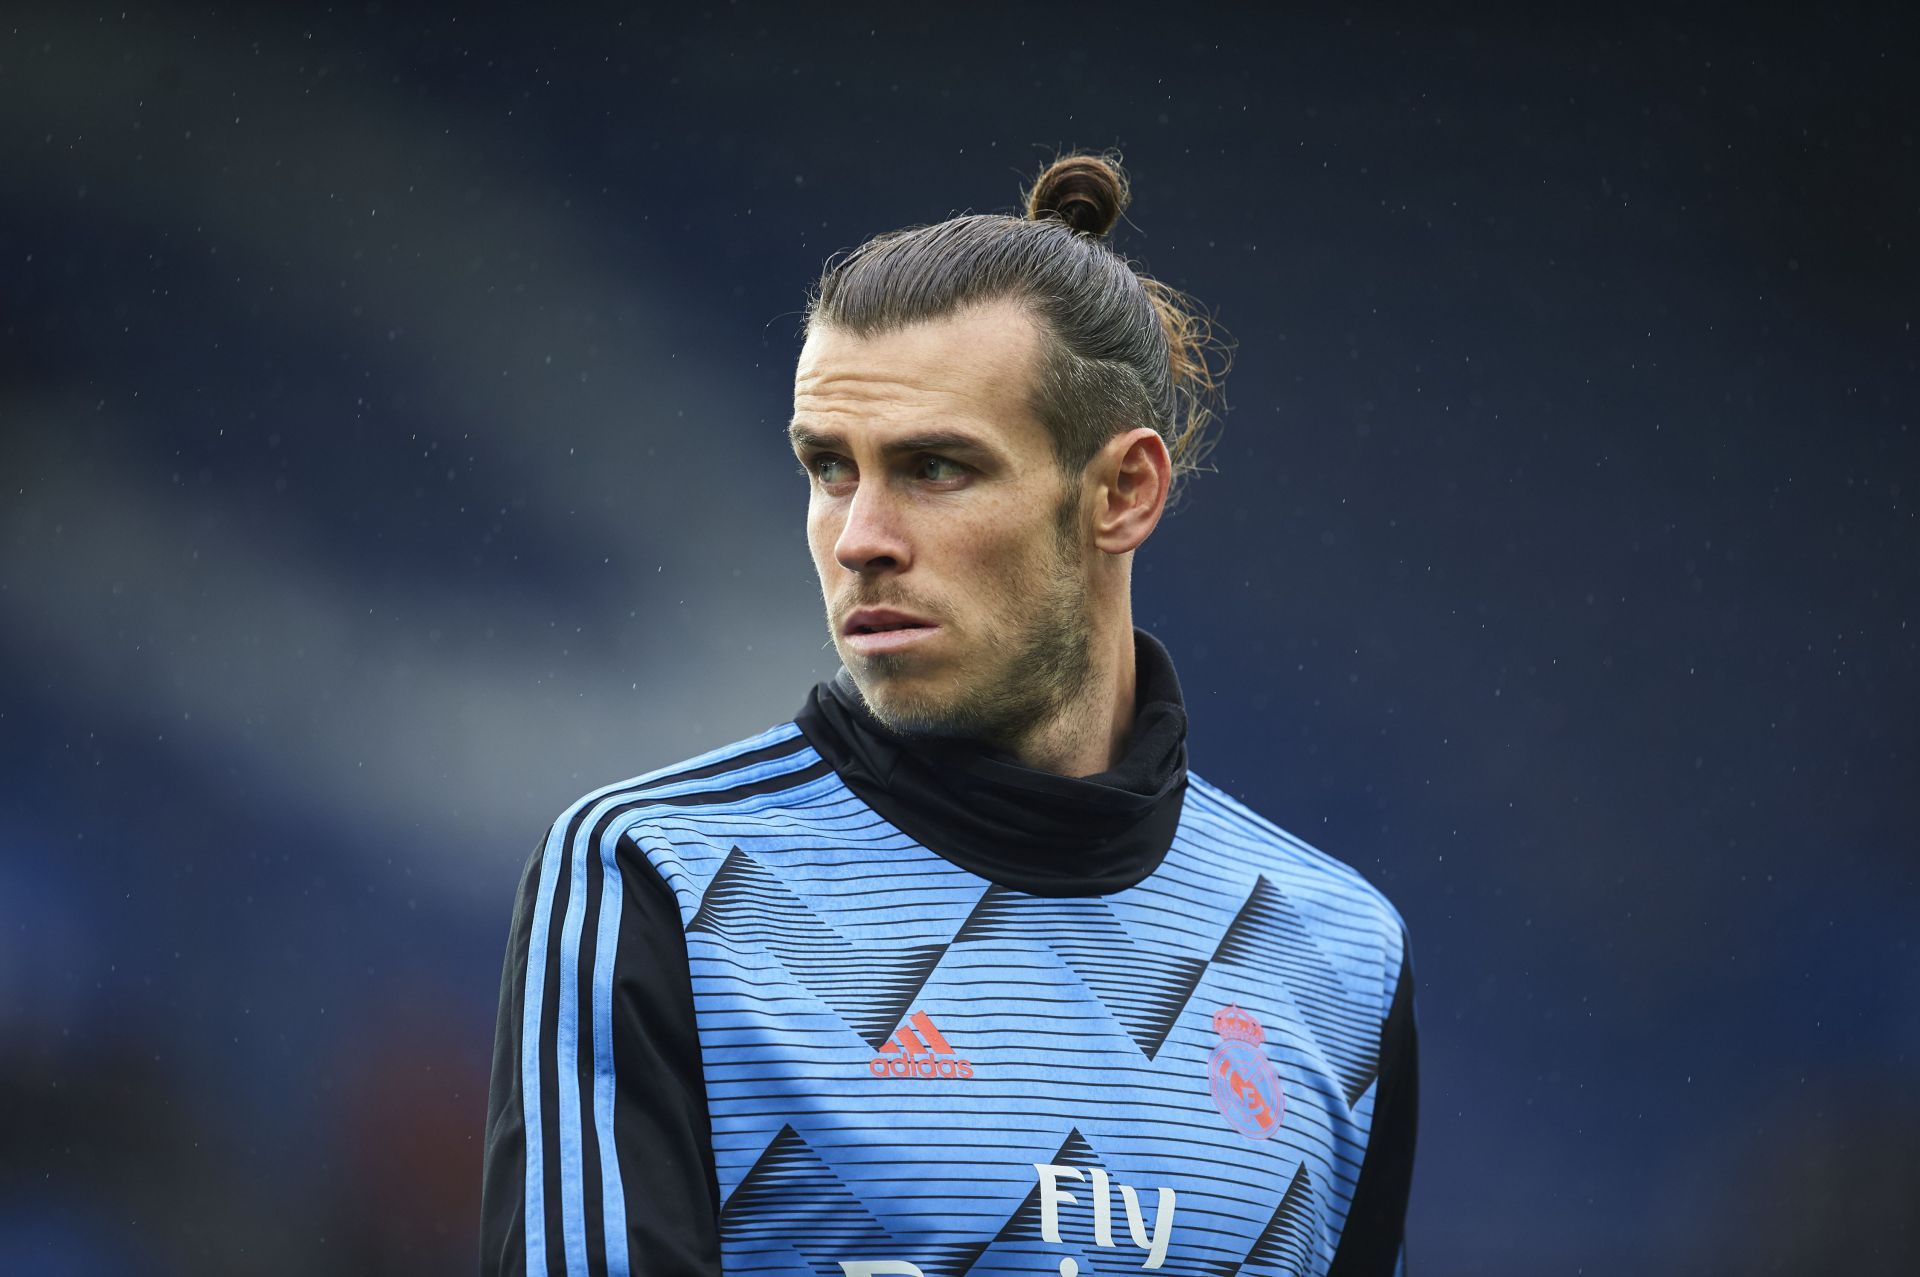 Gareth Bale will play his final game for Real Madrid on Saturday